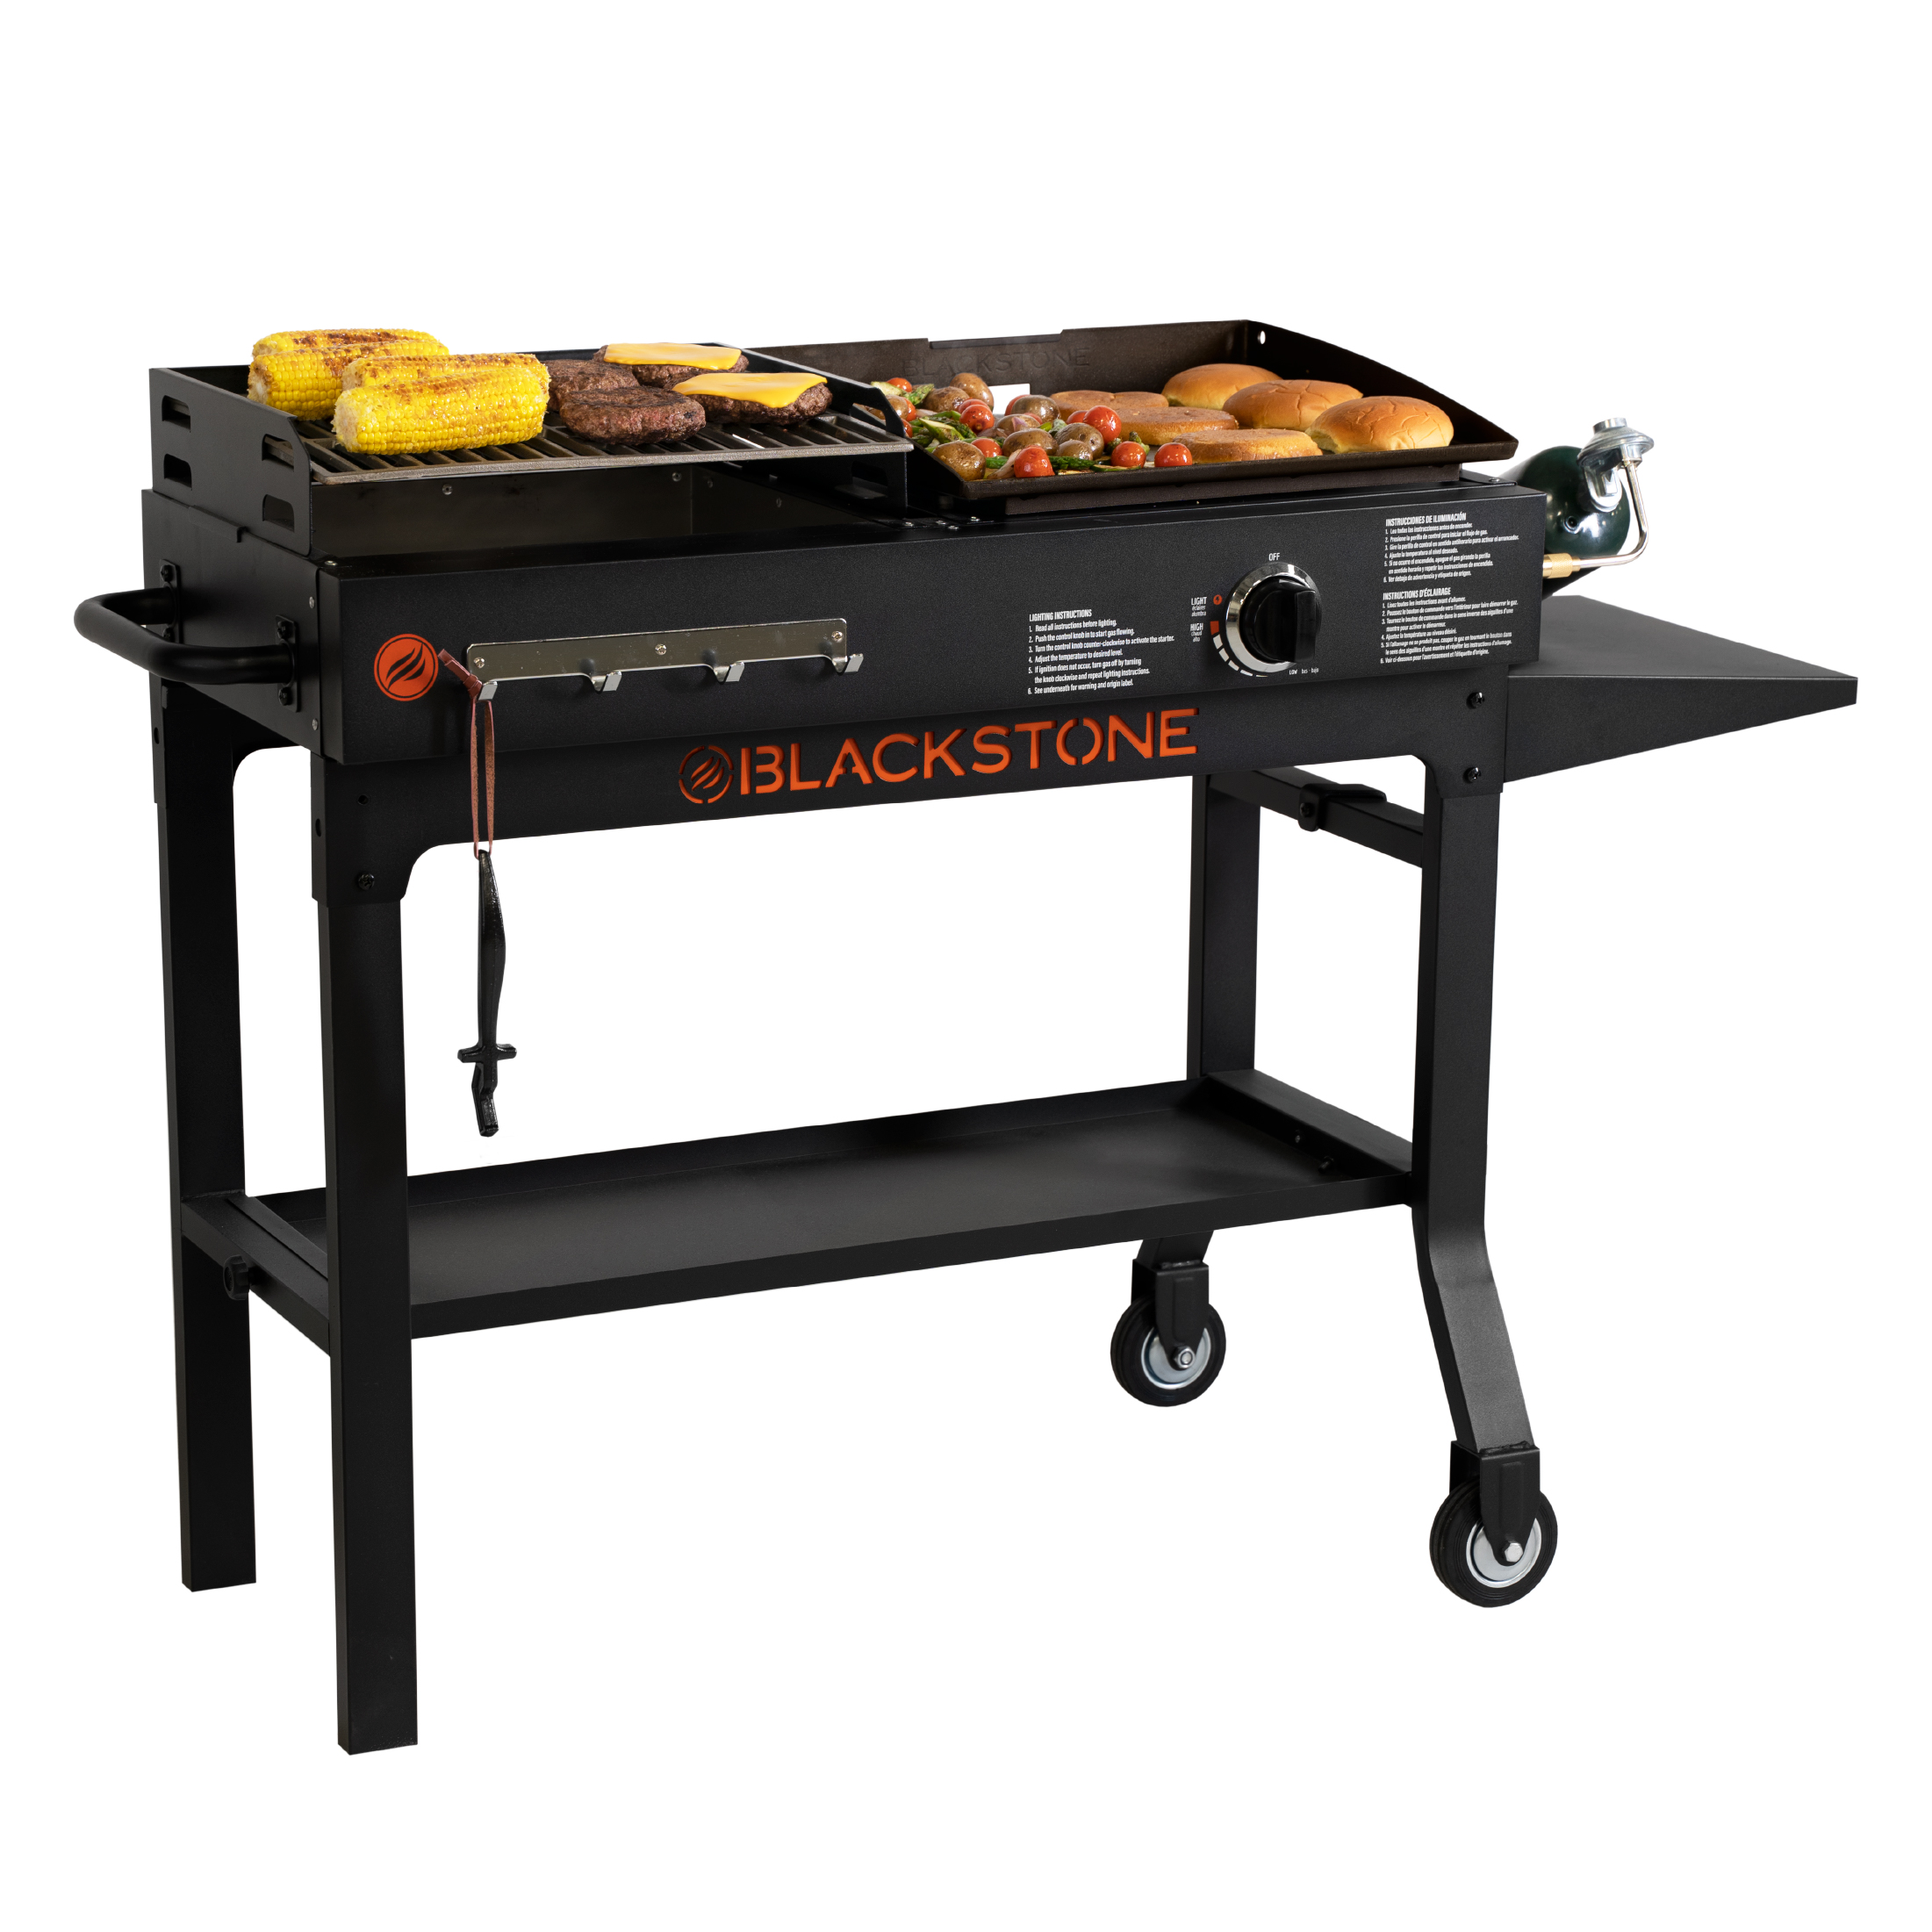 Blackstone Duo 17" Propane Griddle and Charcoal Grill Combo - image 1 of 14